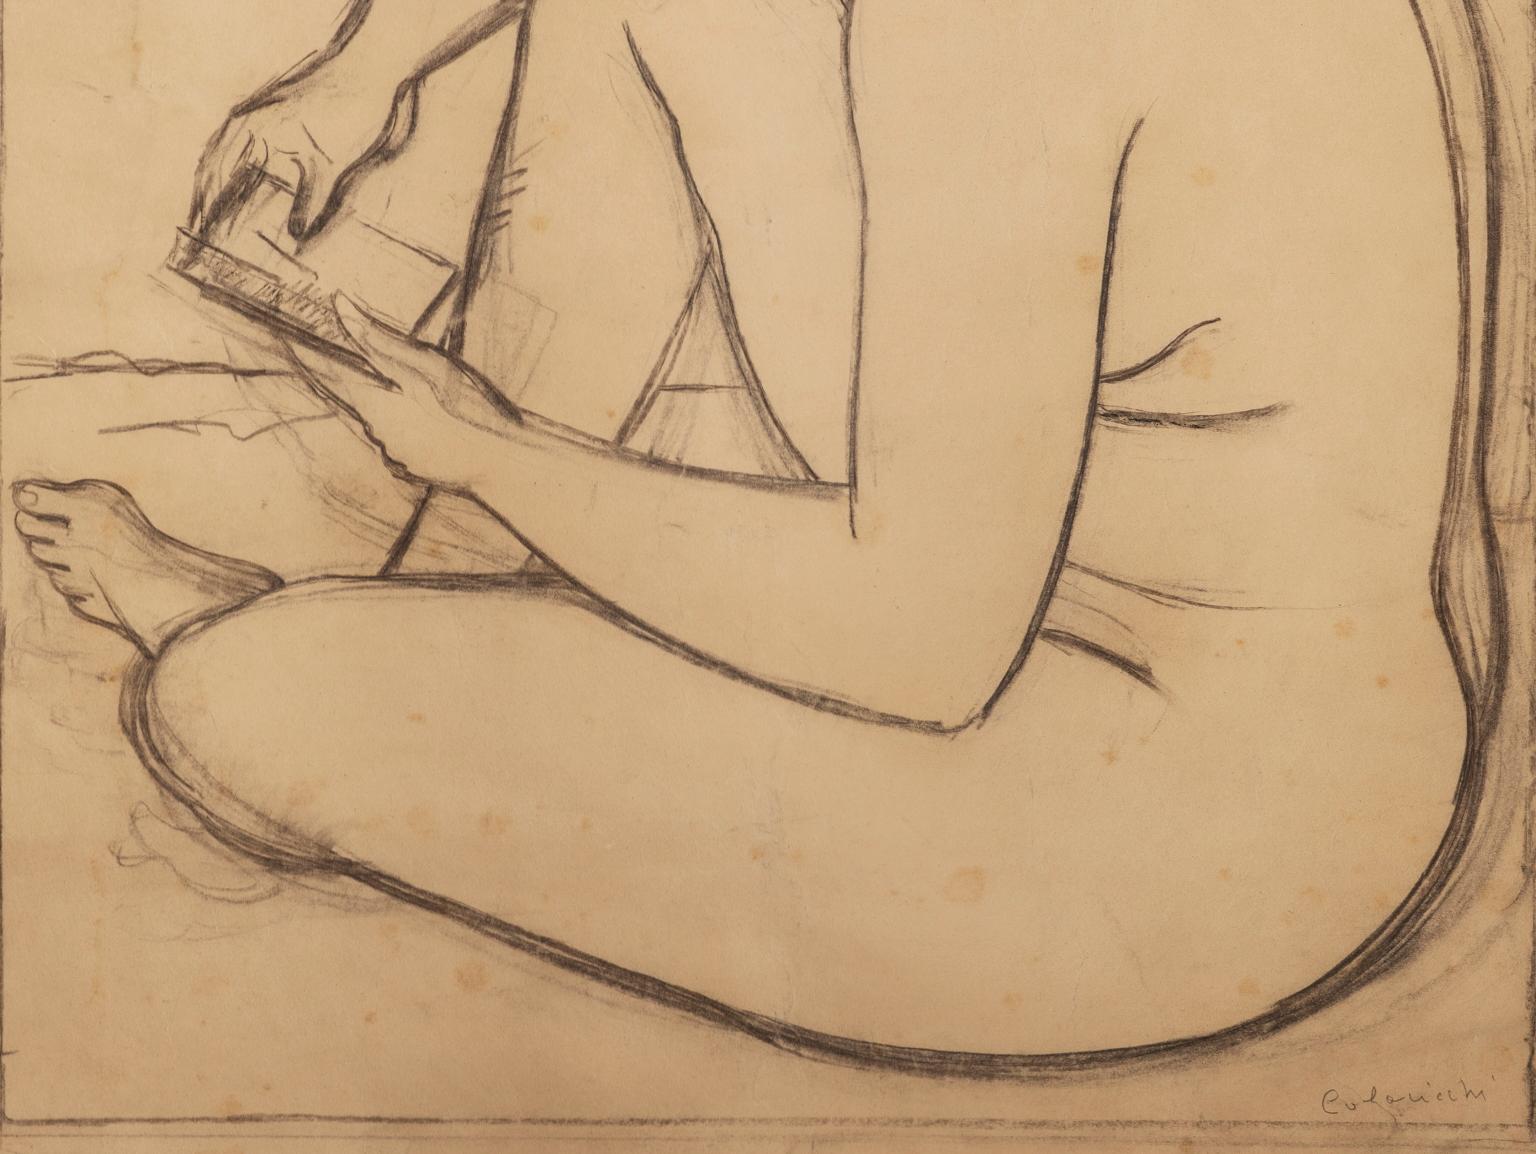 The drawing, signed at the right bottom corner Colacicchi, is a study for the painting Psyche, exhibited for the first time in 1939 at the Ussi Prize-planned by the Florence Academy of Drawings-and, one year later, at the monographic exhibition held